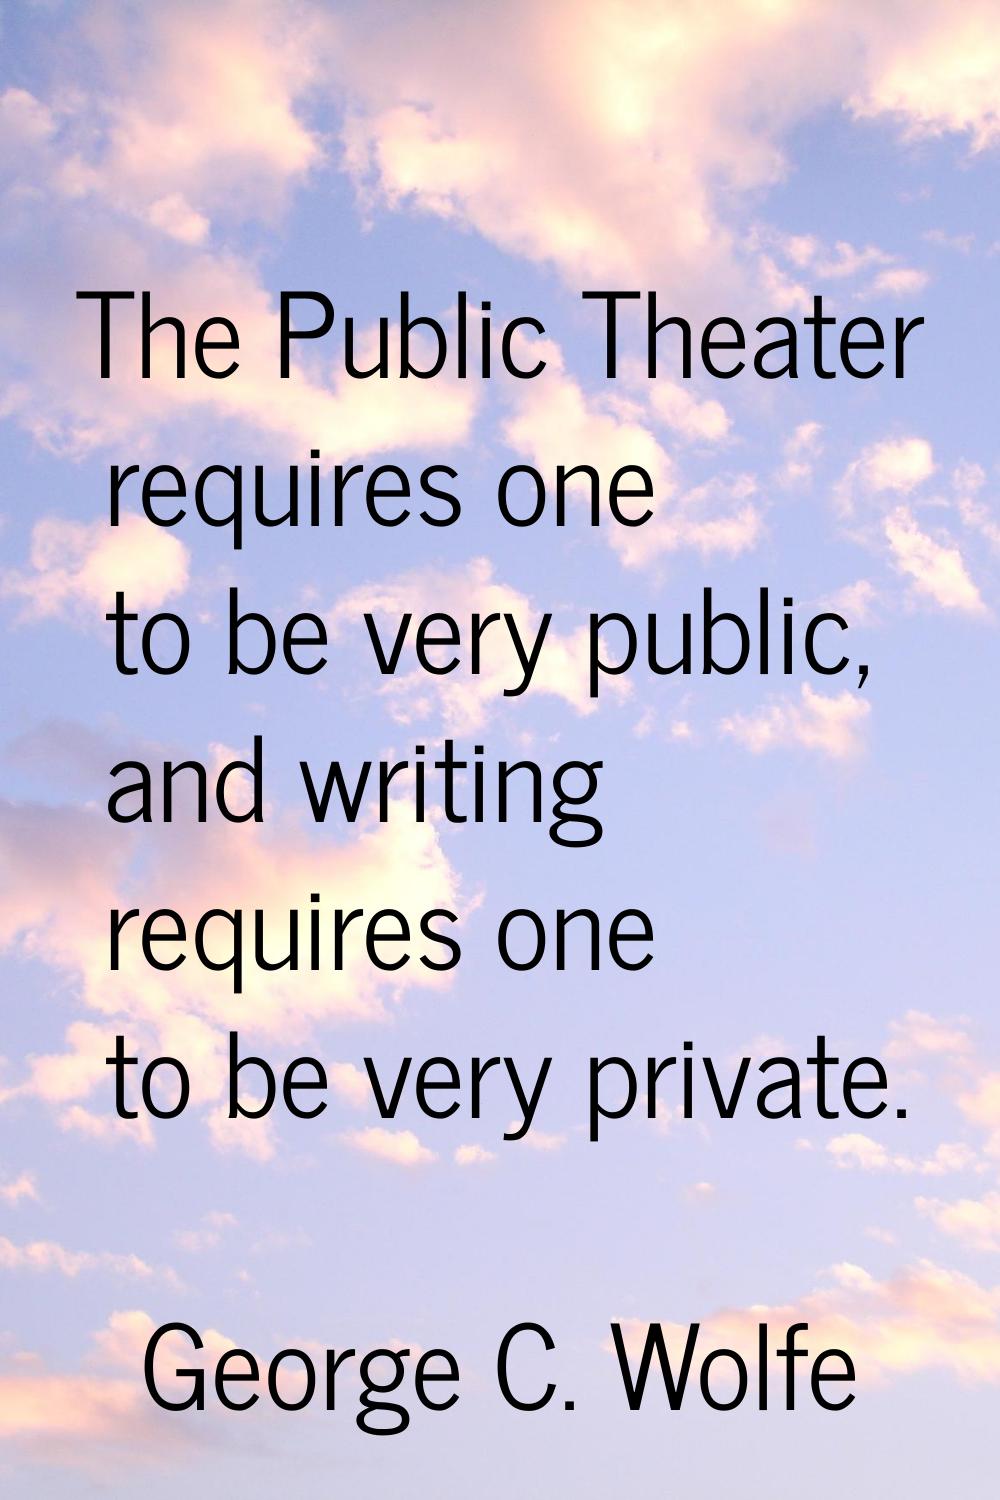 The Public Theater requires one to be very public, and writing requires one to be very private.